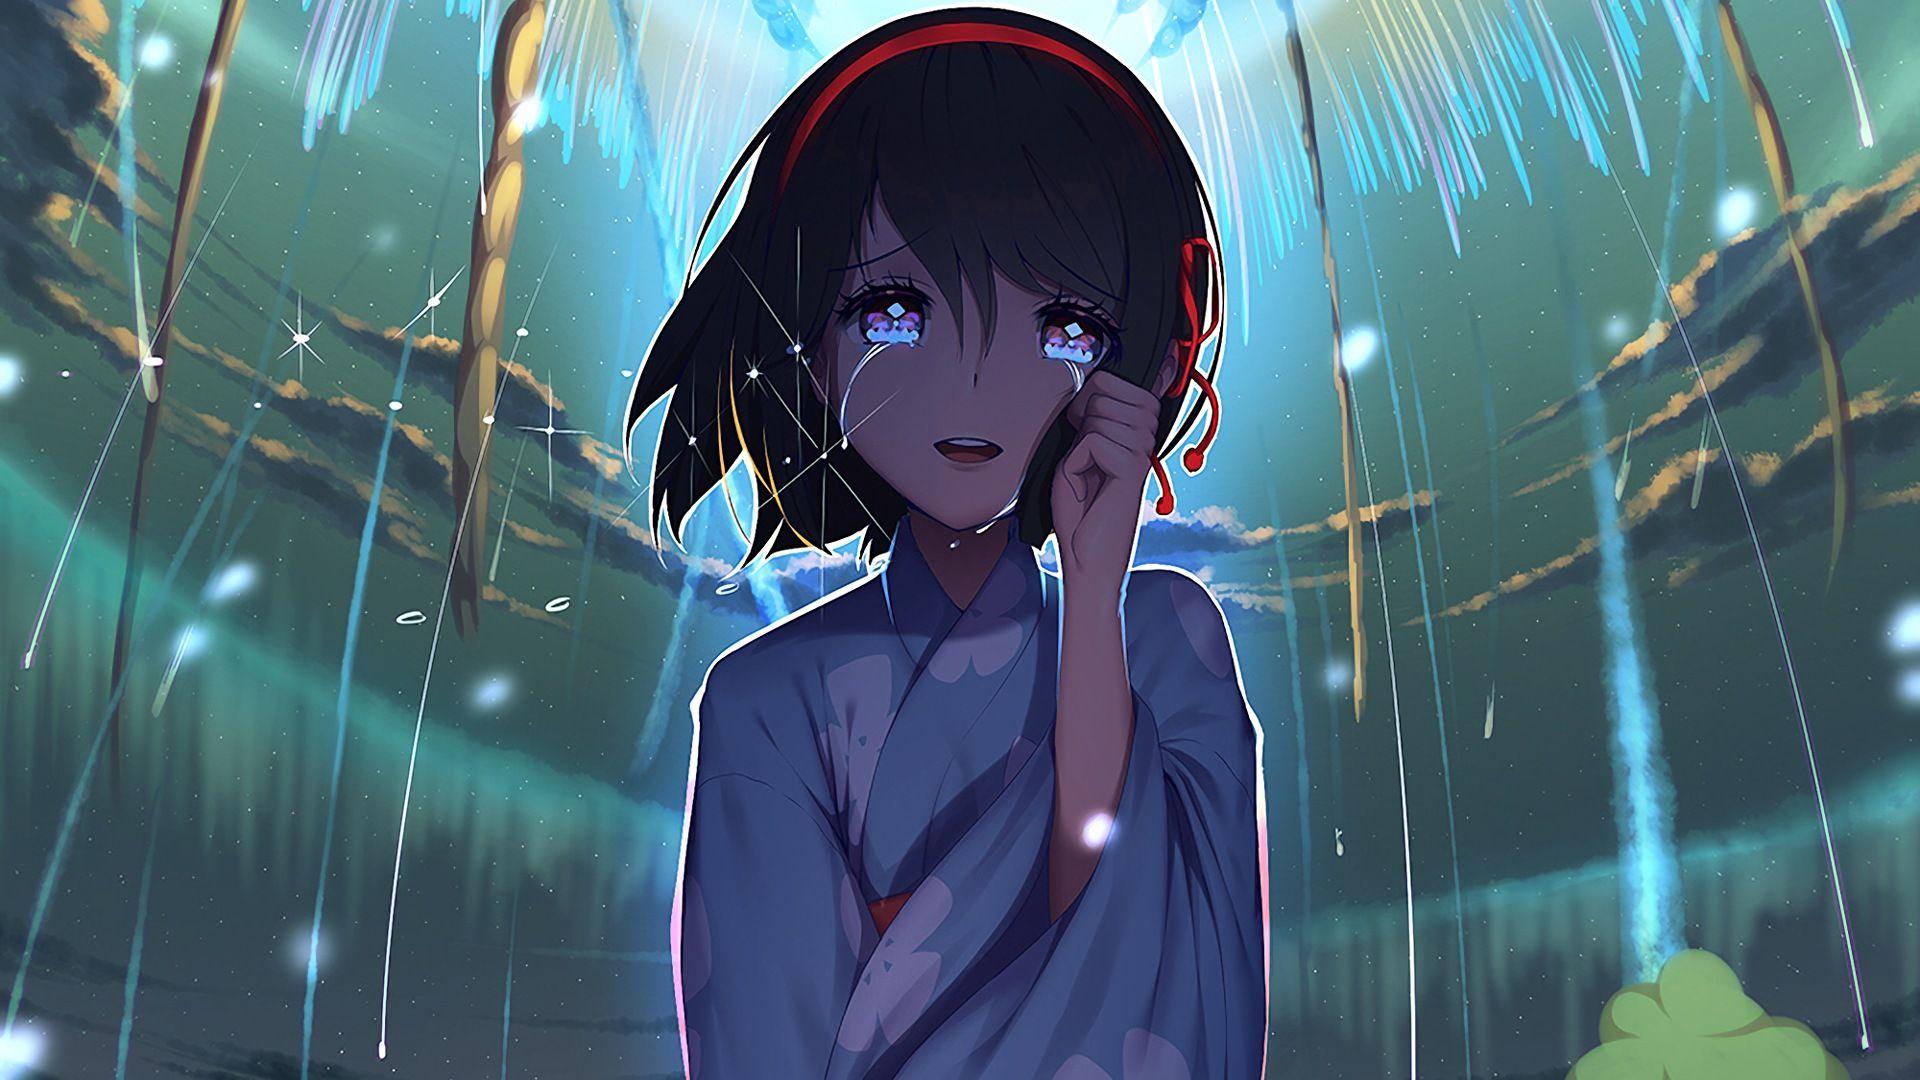 Anime Girl Crying 1920x1080 Hd Wallpapers - Wallpaper Cave